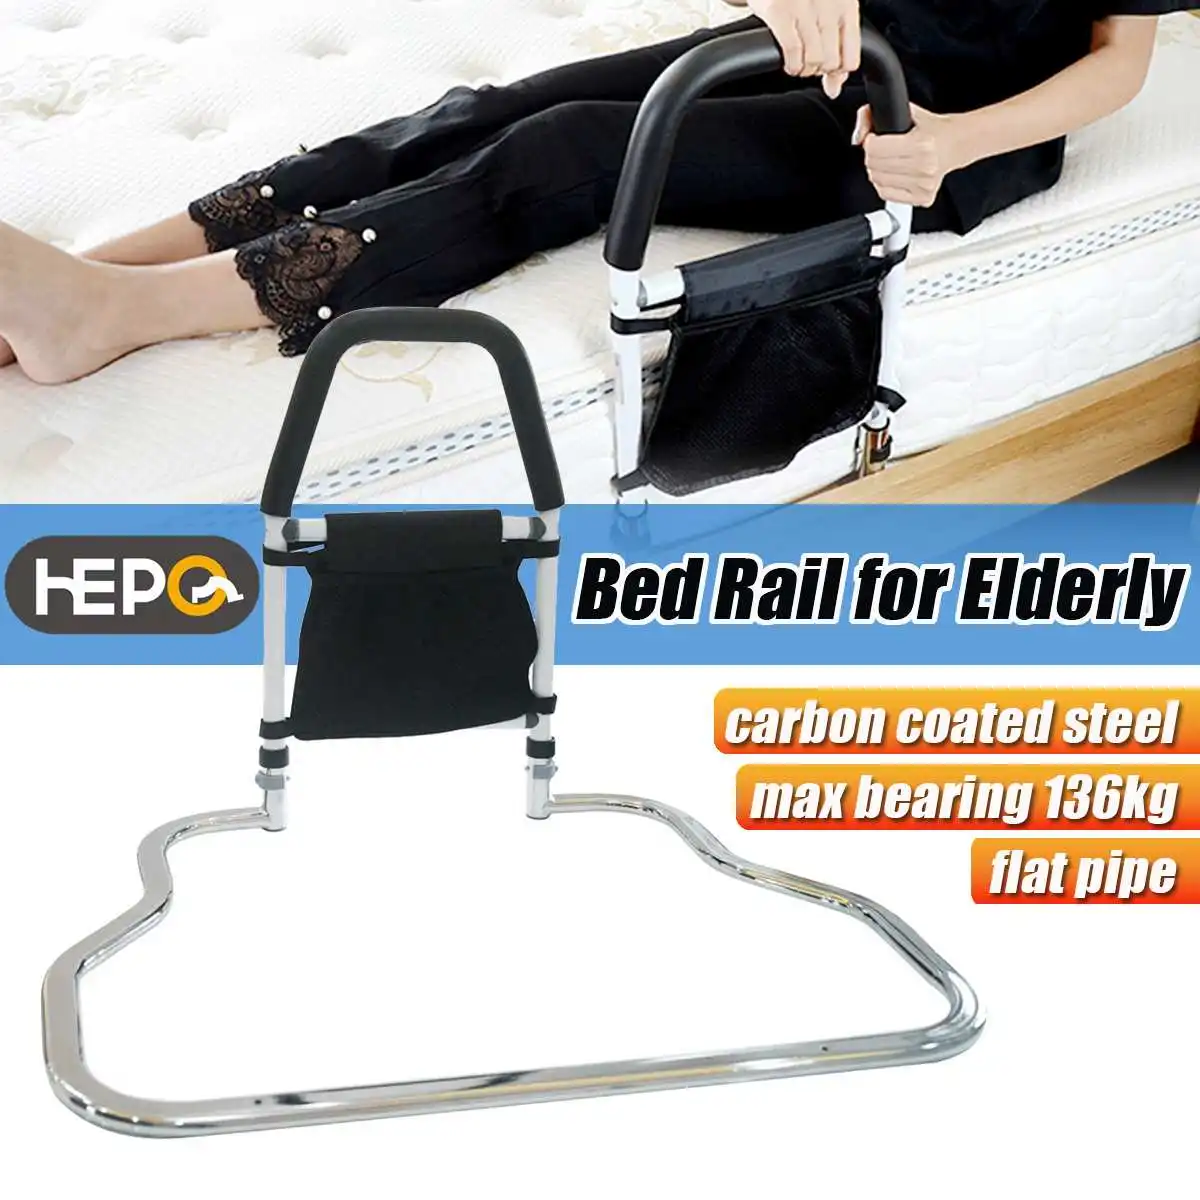 

5 Types Get Up Handle Secure Bed Rail Bedroom Safety Fall Prevention Aid Handrail for Assisting Elderly and Pregnant Tool